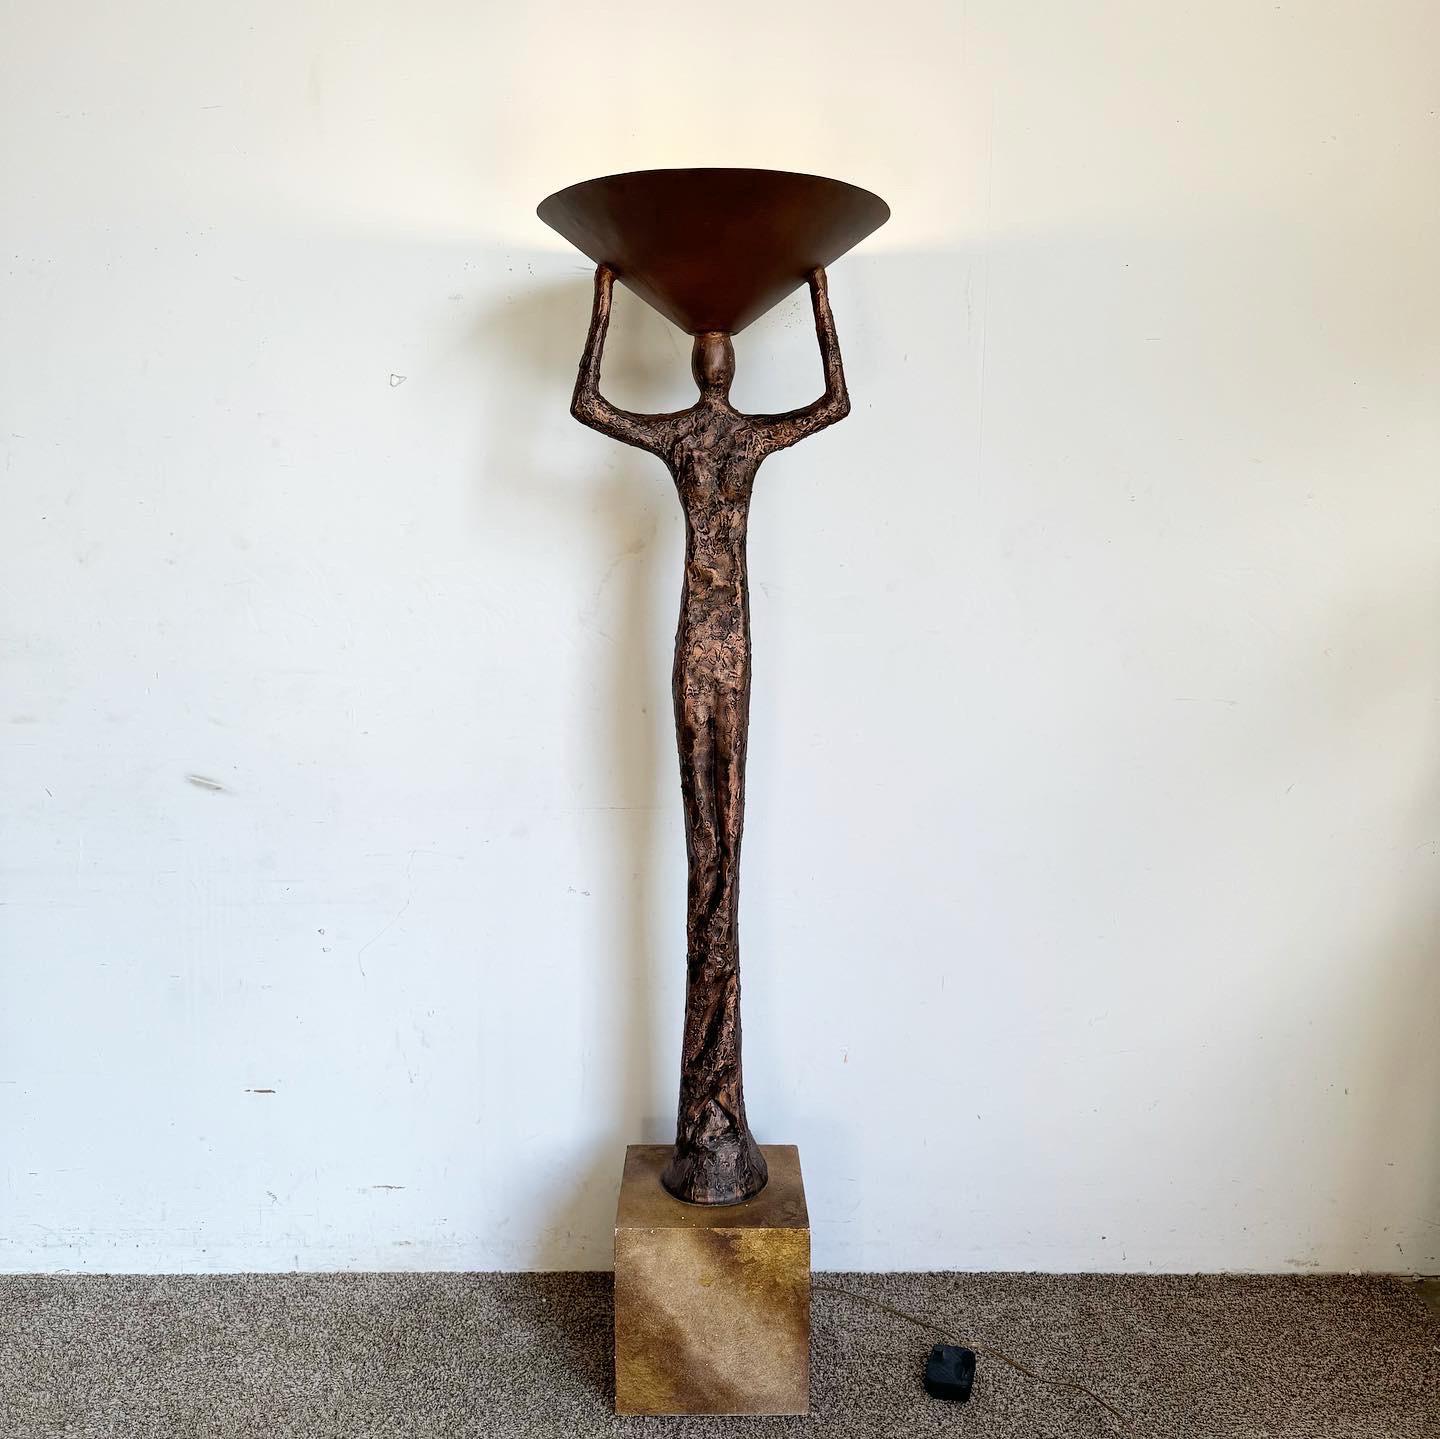 The Giacometti Style Sculpture Floor Lamp Torchiere is a blend of art and illumination. Inspired by Giacometti's iconic style, it features a slender, sculptural figure on a cubist block, holding a lamp shade. This torchiere design provides a warm,